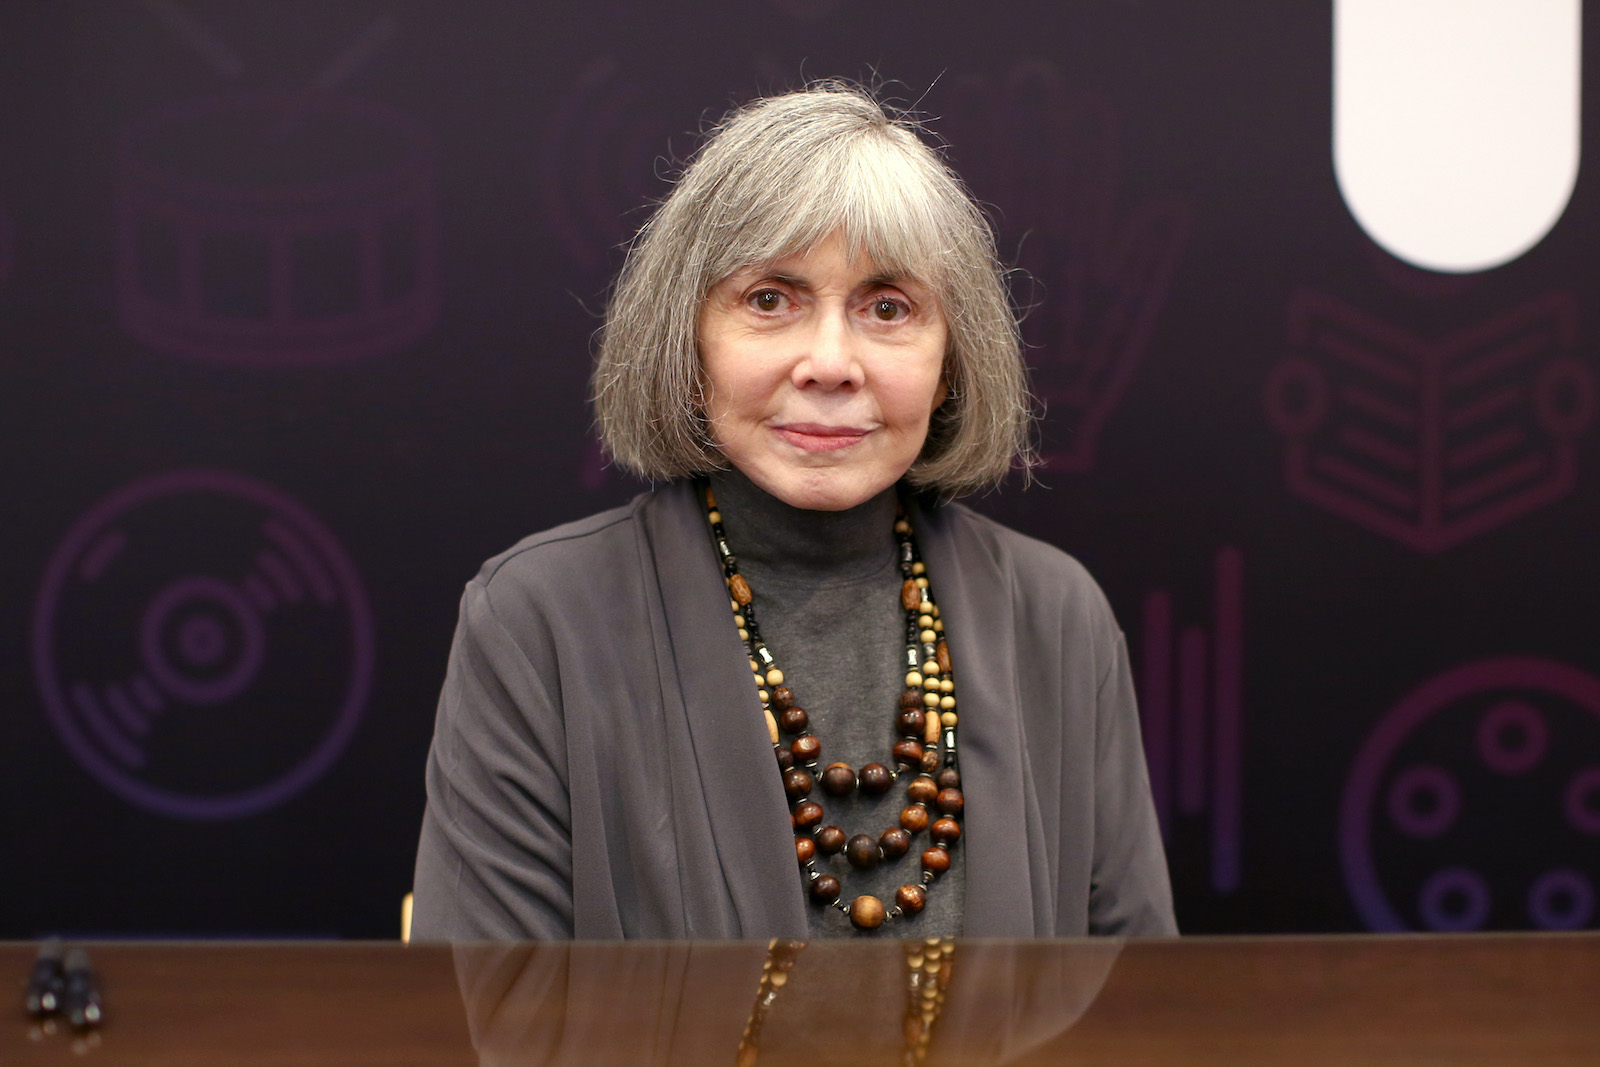 Author Anne Rice attended a book signing during Entertainment Weekly's PopFest